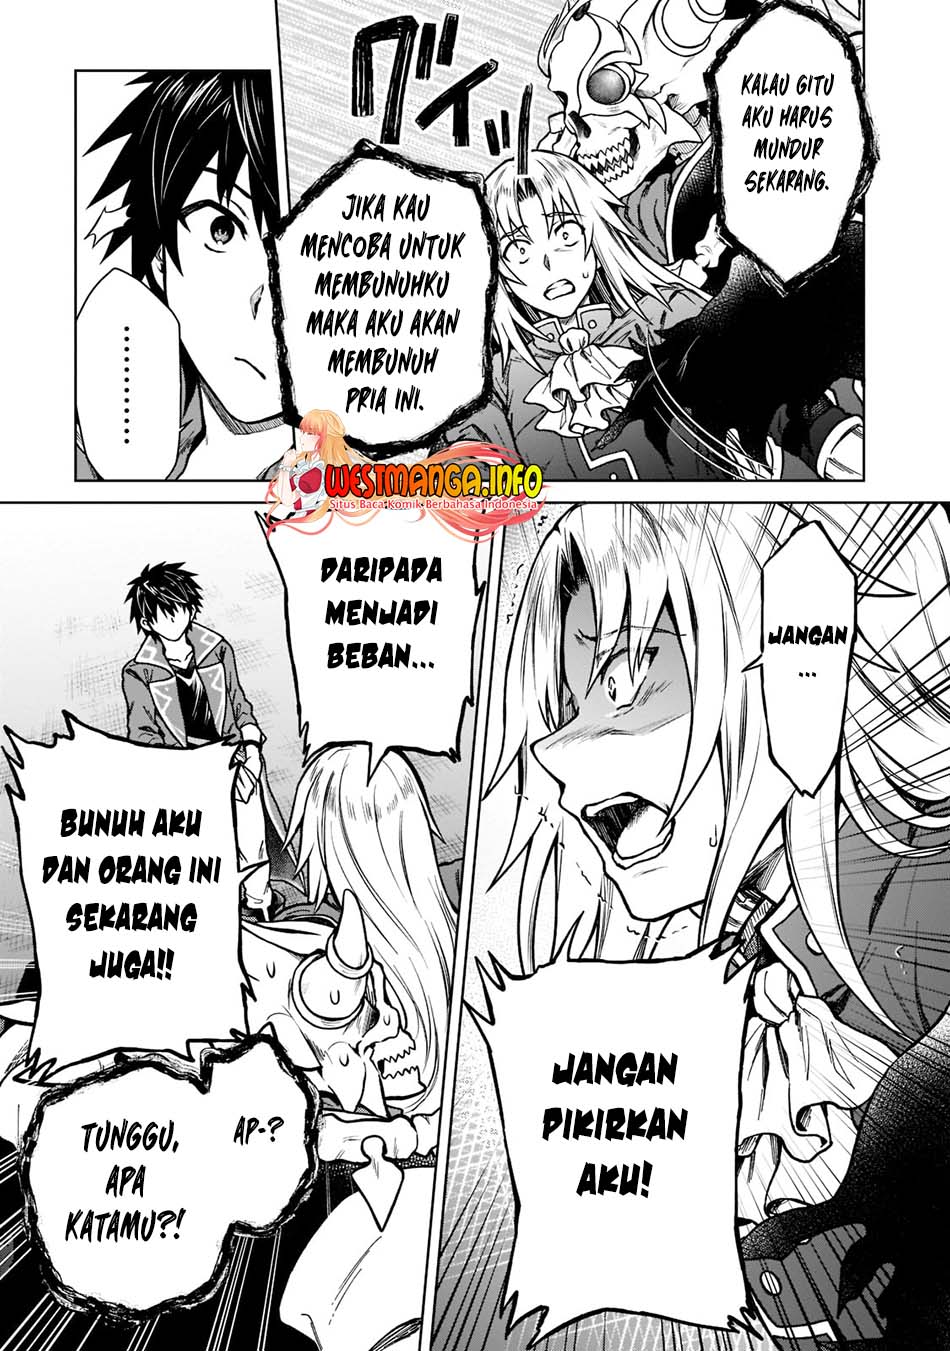 Dilarang COPAS - situs resmi www.mangacanblog.com - Komik d rank adventurer invited by a brave party and the stalking princess 011 - chapter 11 12 Indonesia d rank adventurer invited by a brave party and the stalking princess 011 - chapter 11 Terbaru 19|Baca Manga Komik Indonesia|Mangacan